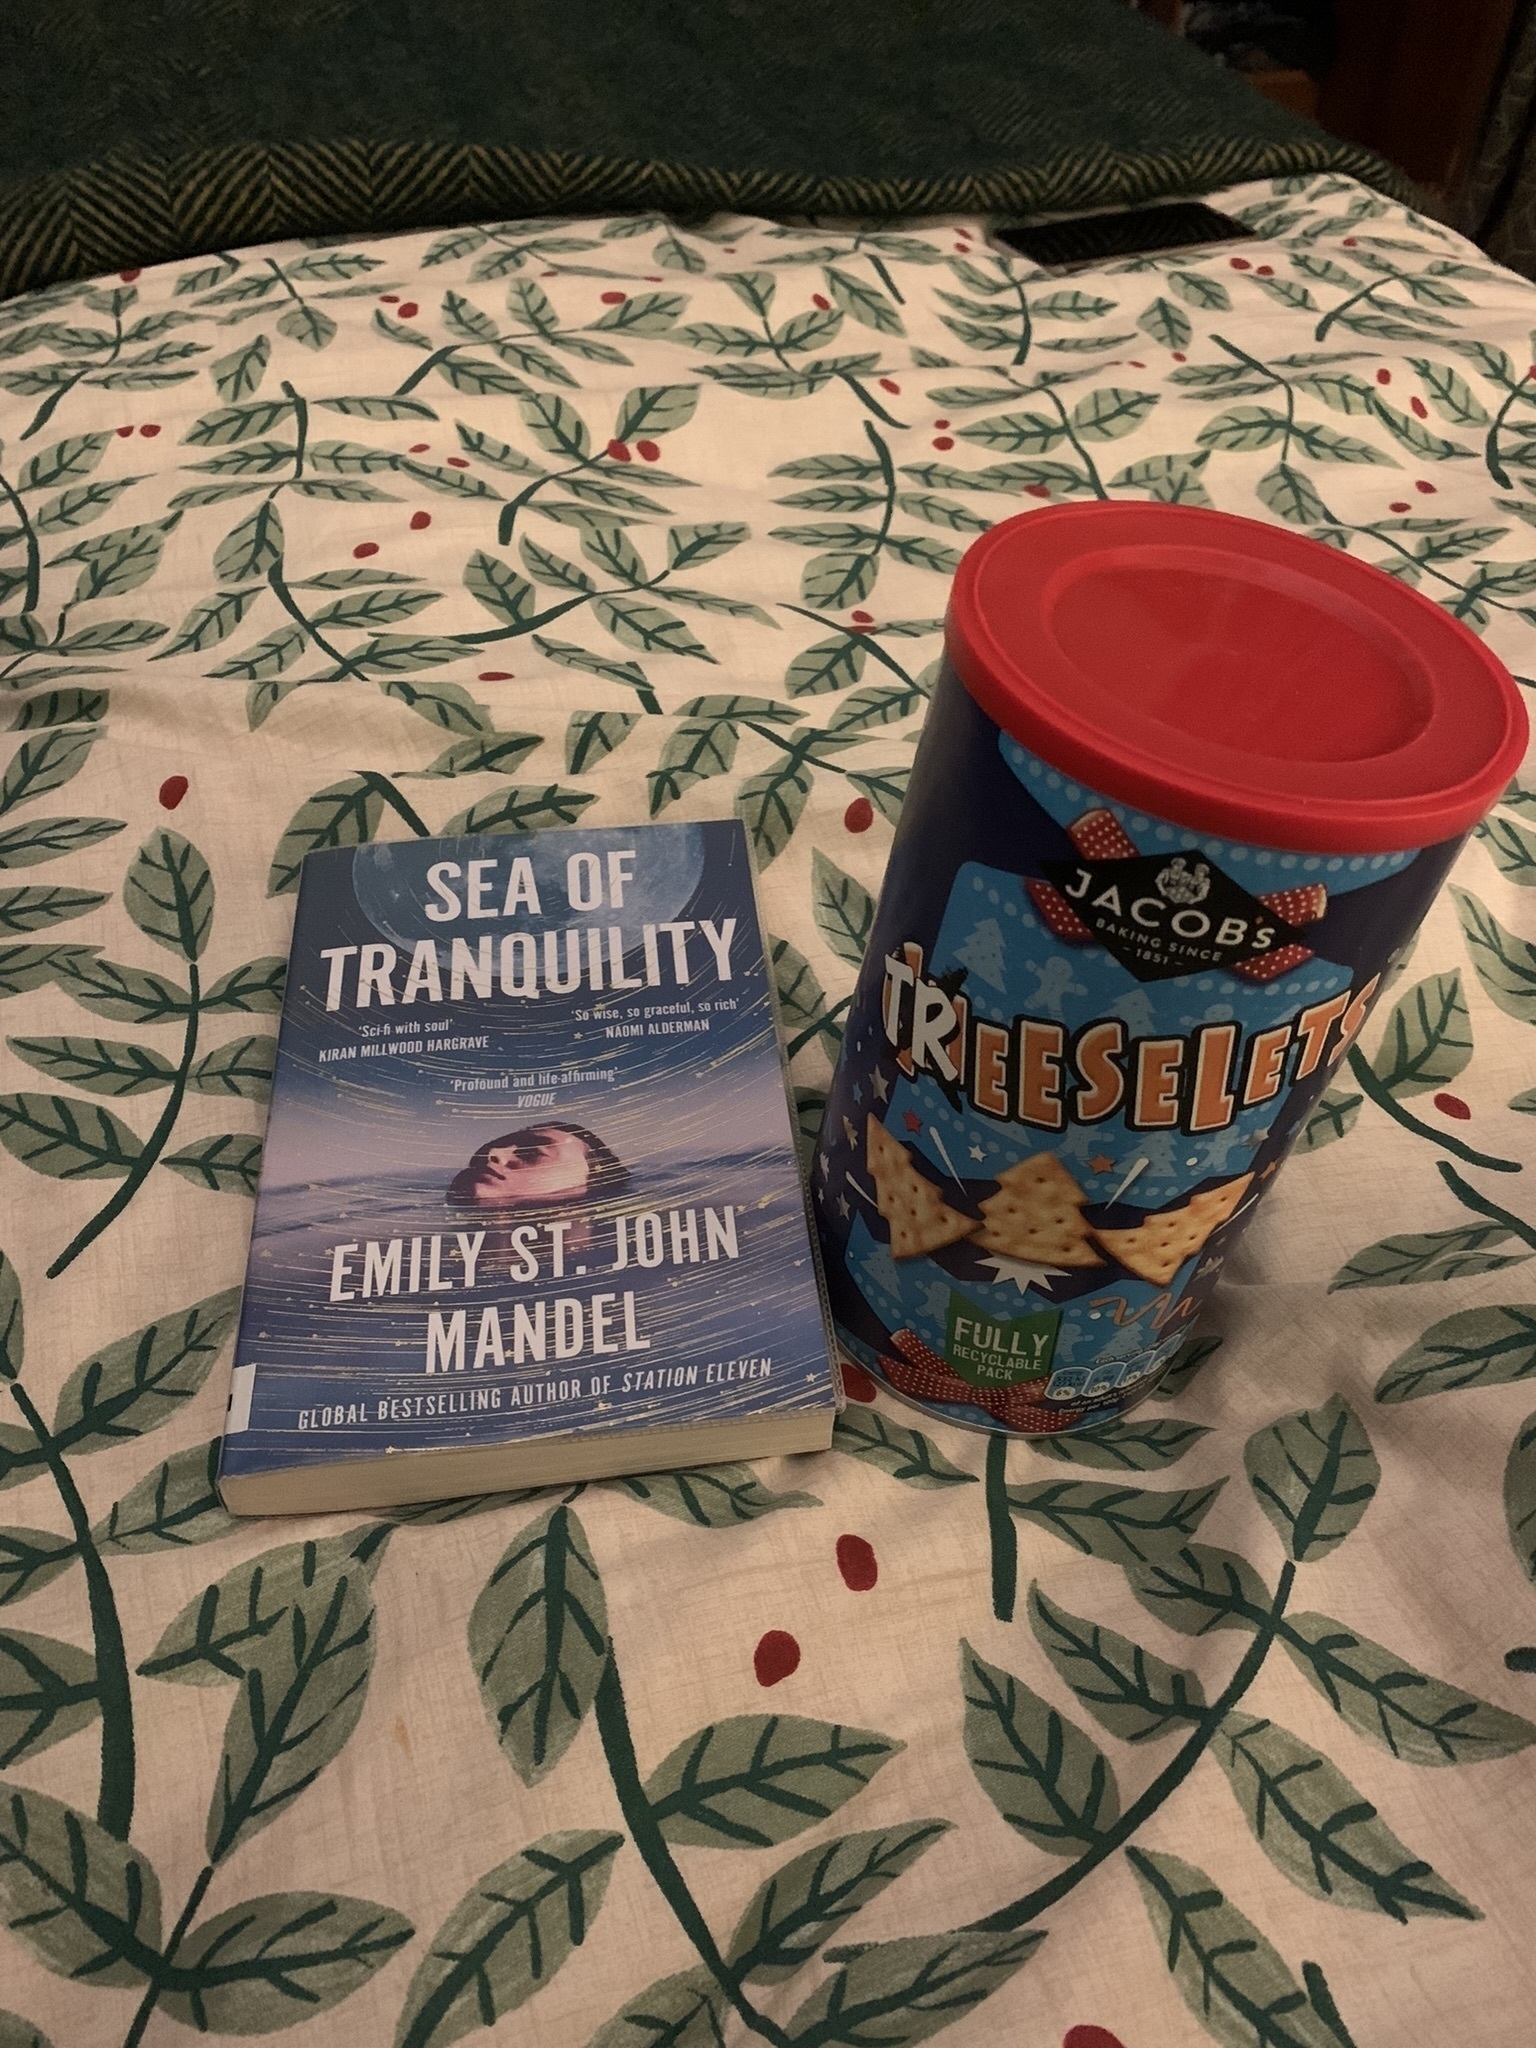 Sea of Tranquility book on a bedcover next to a tub of Treeslets.